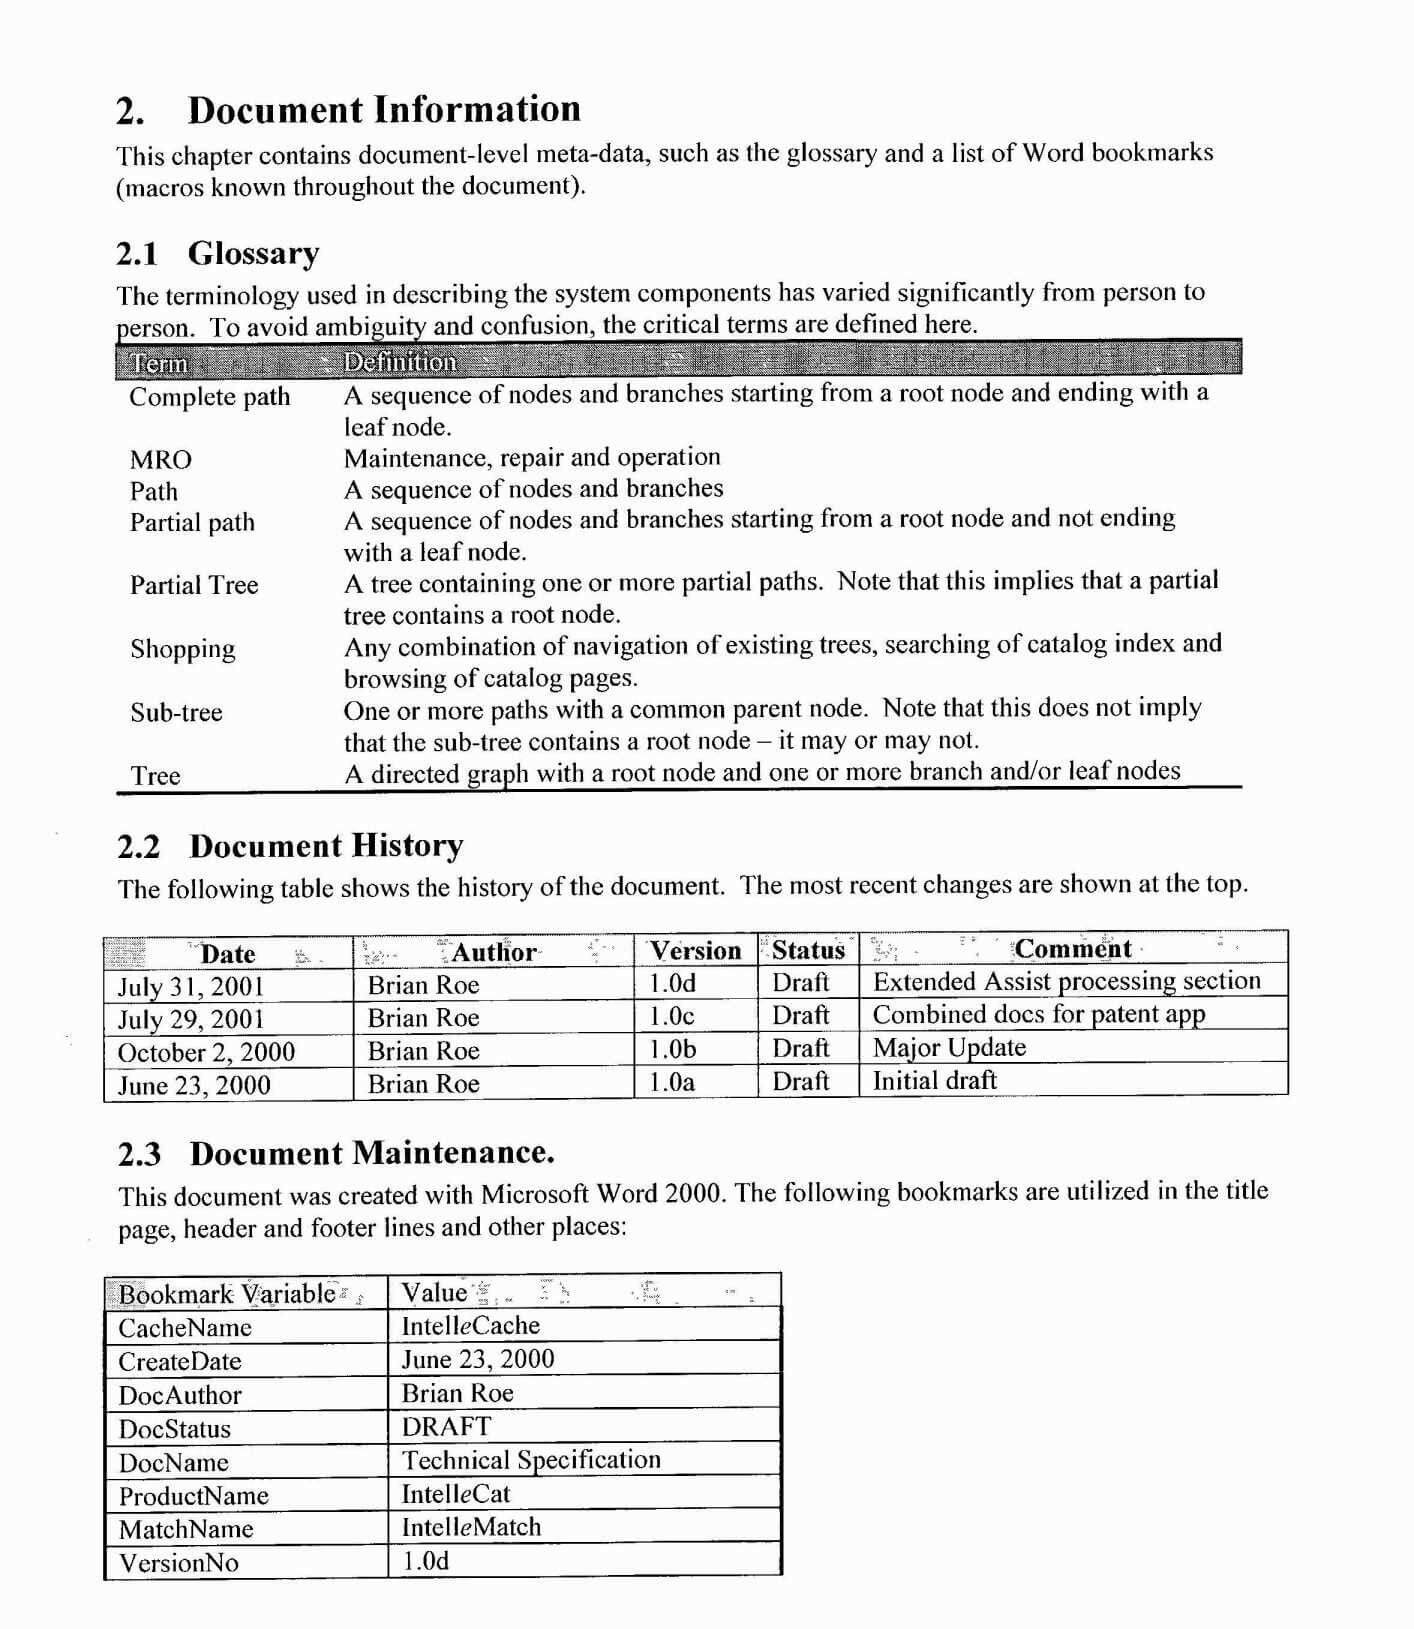 Summary Report Template | Dailovour With Regard To Test Summary Report Template